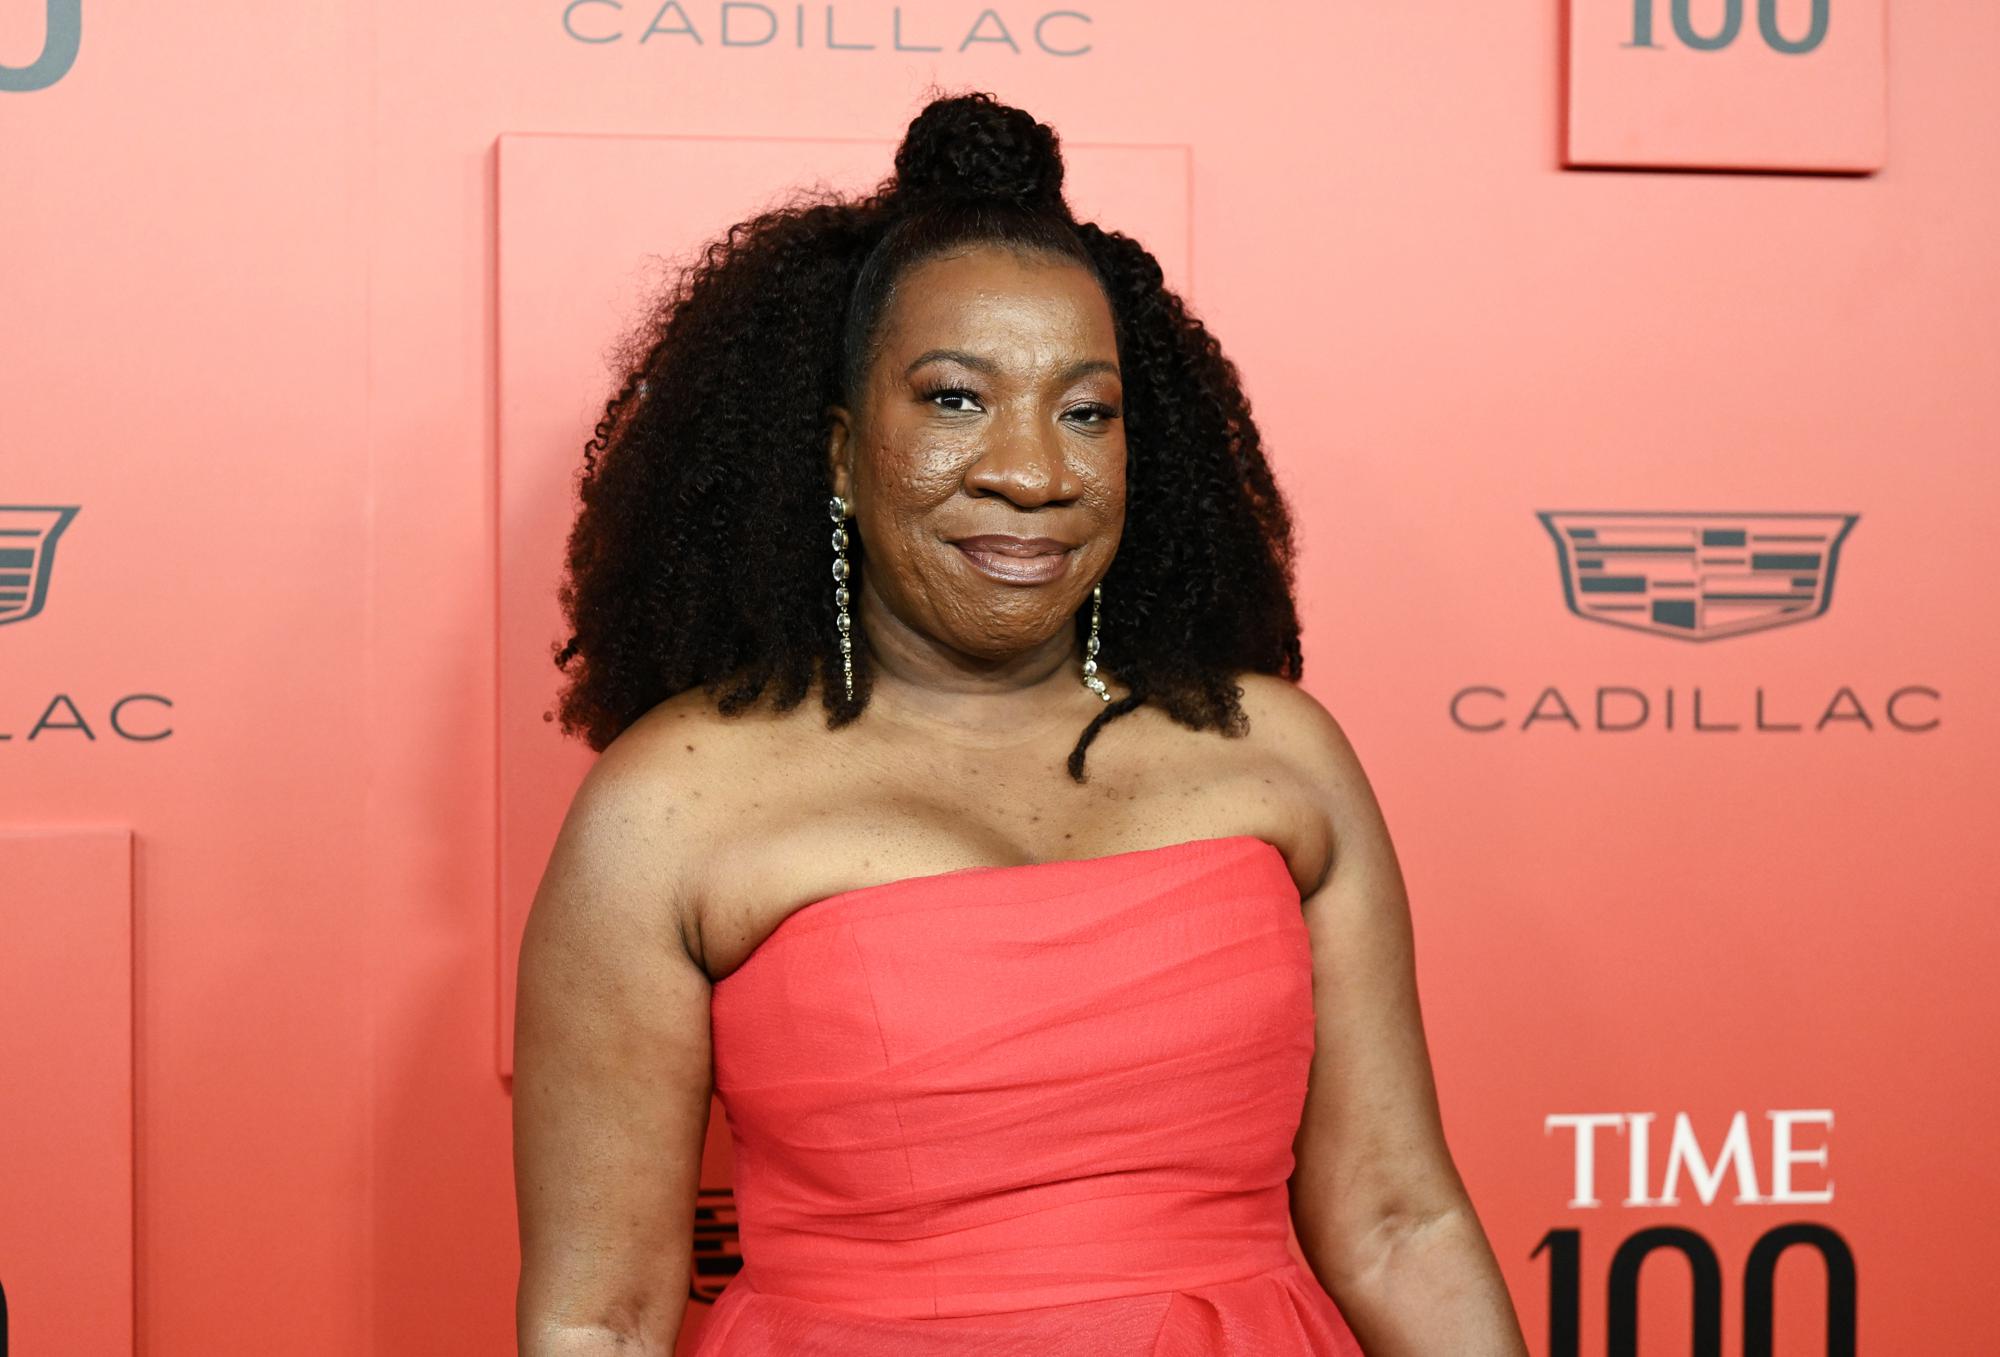 FILE - MeToo founder Tarana Burke attends the TIME100 Gala celebrating the 100 most influential people in the world on June 8, 2022, in New York. (Photo by Evan Agostini/Invision/AP, File)